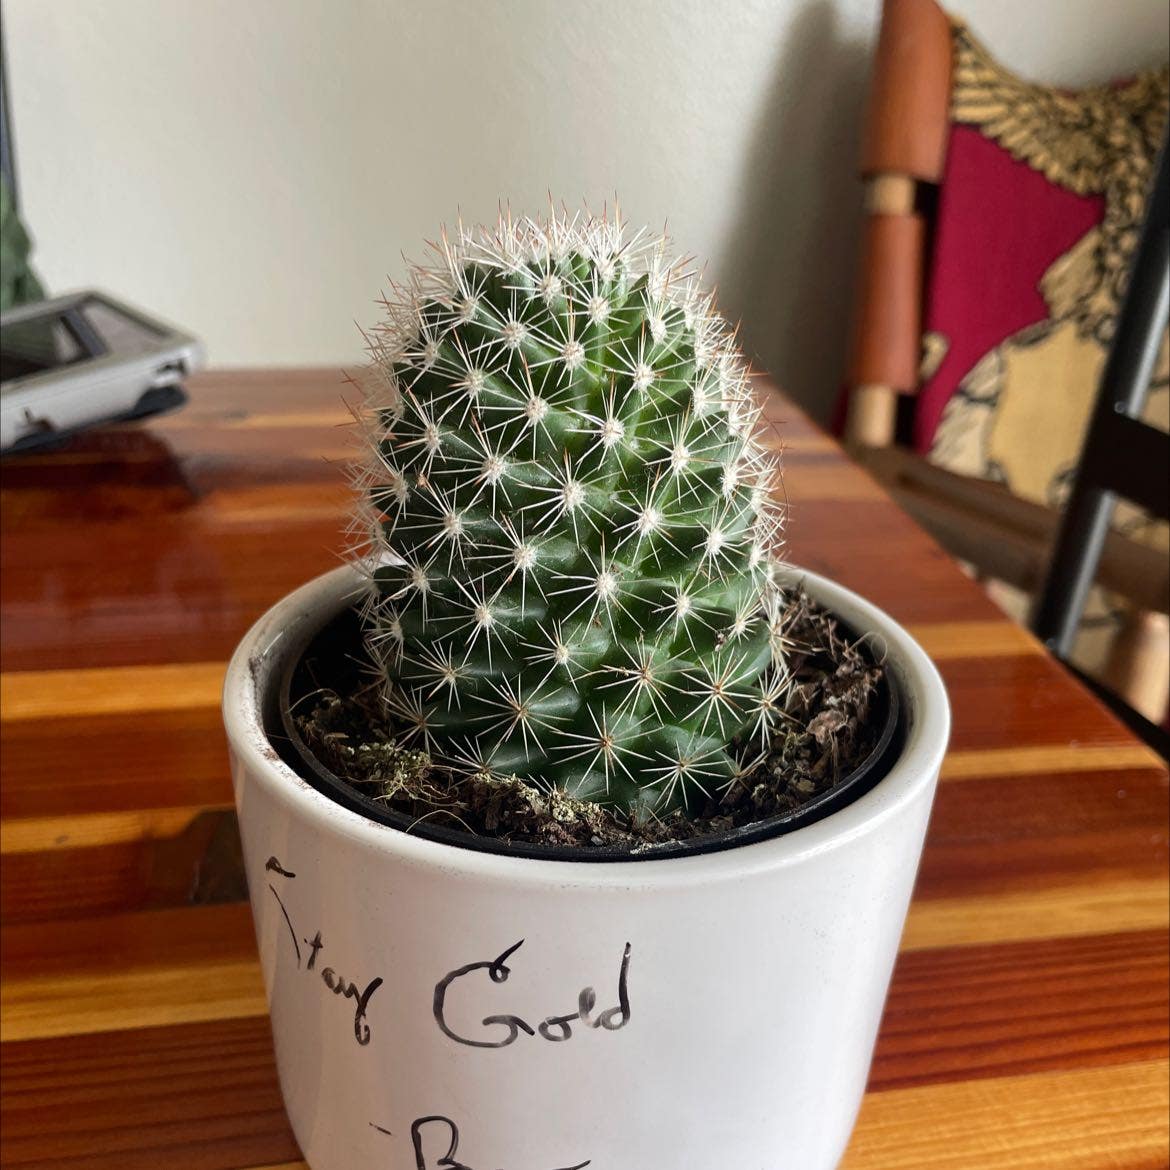 A healthy Hooked Cactus in a white pot on a wooden surface.